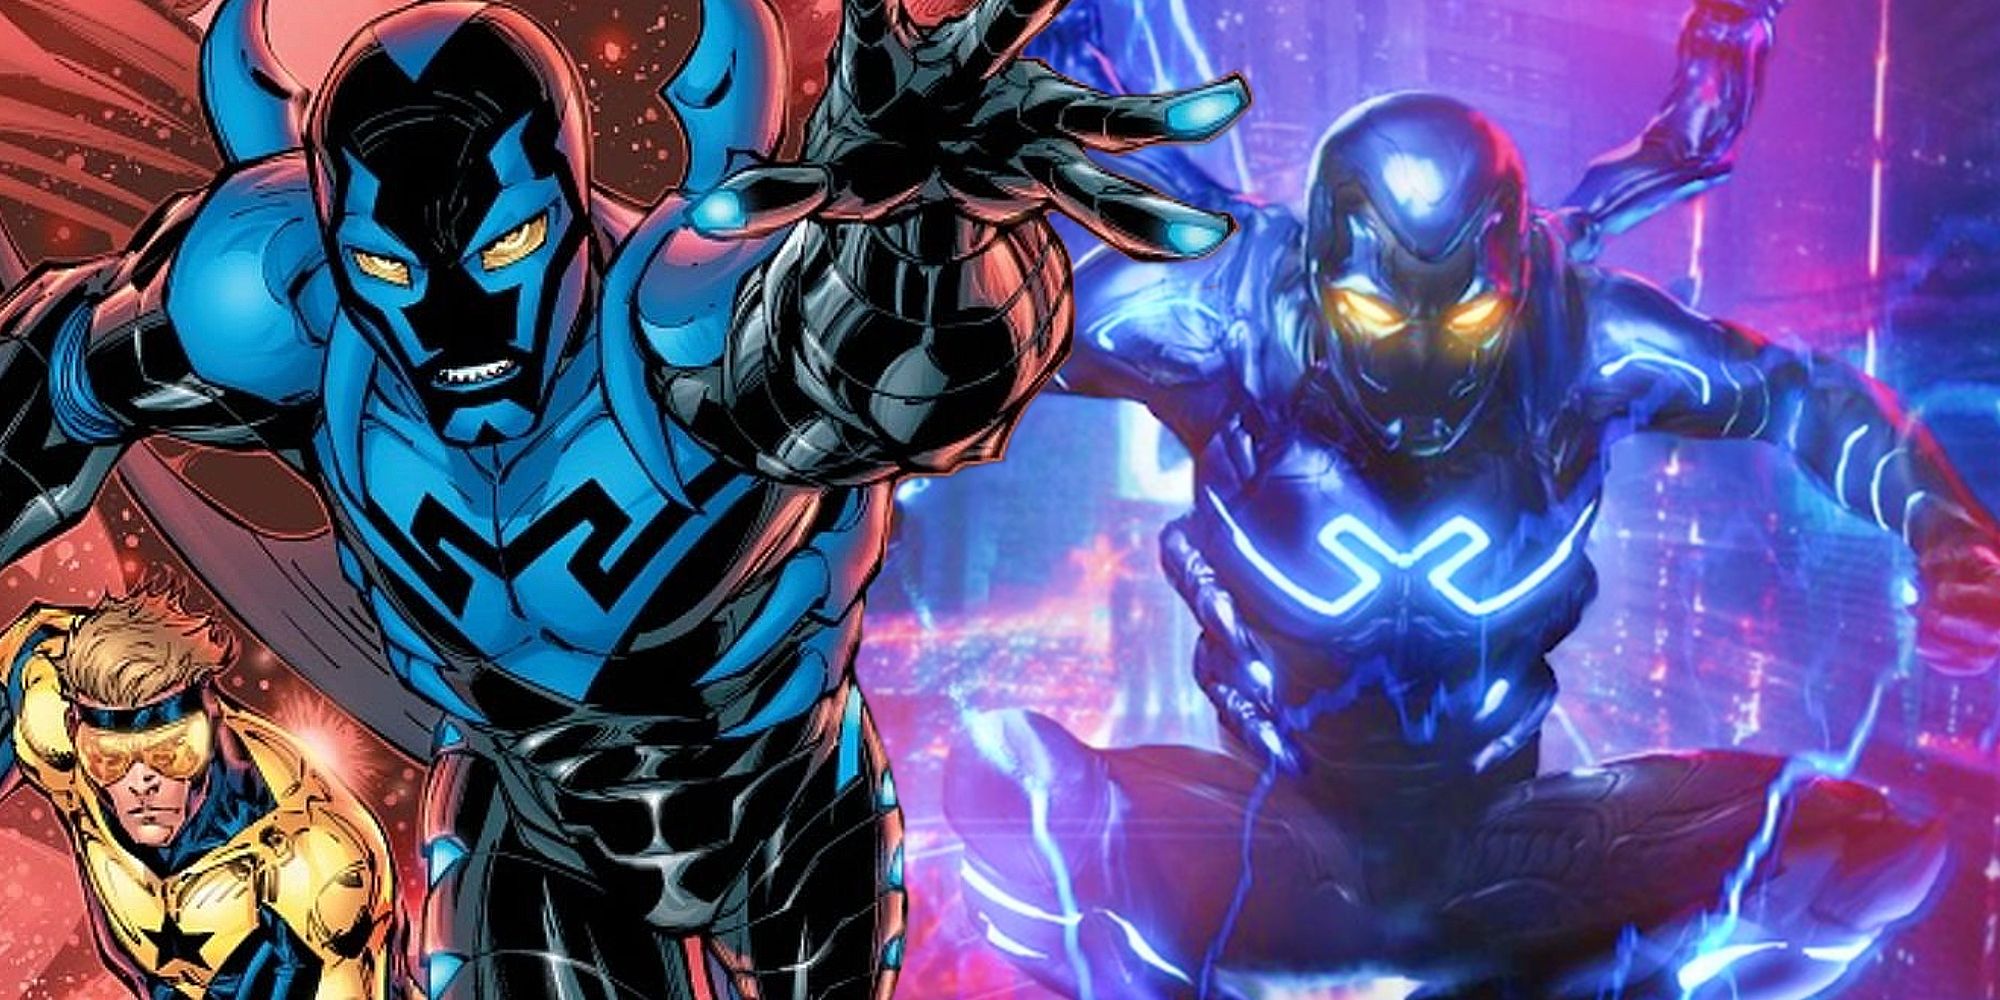 Origins of Blue Beetle: Latino Roots of the Comic Book Hero